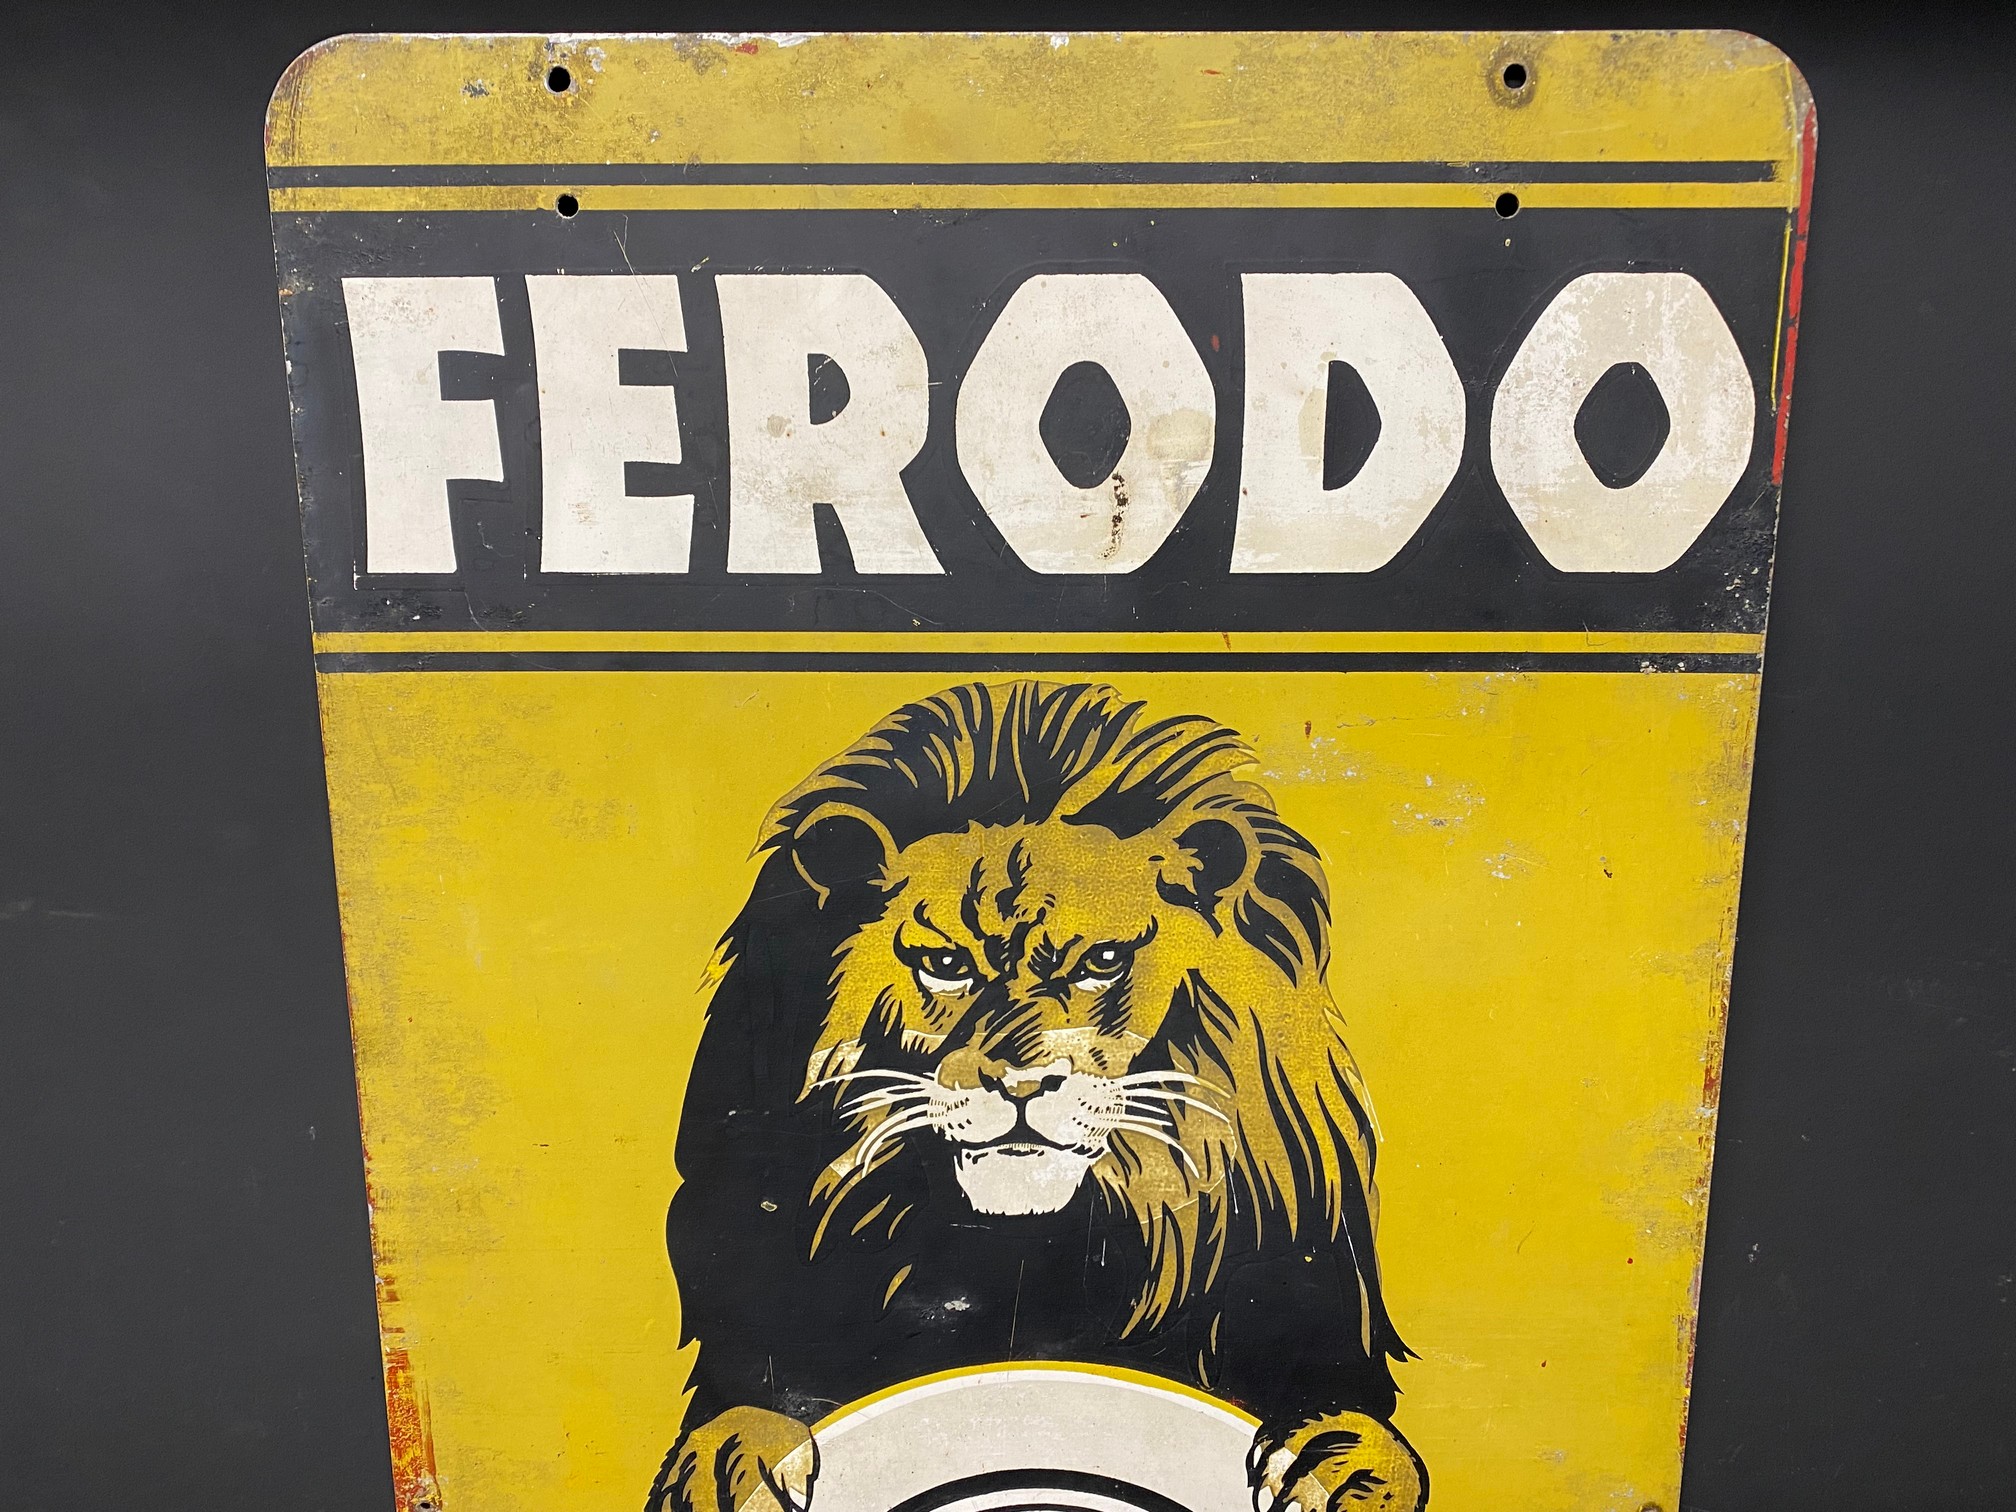 A Ferodo Brake Testing Service double sided tin advertising sign, 18 x 36". - Image 5 of 6